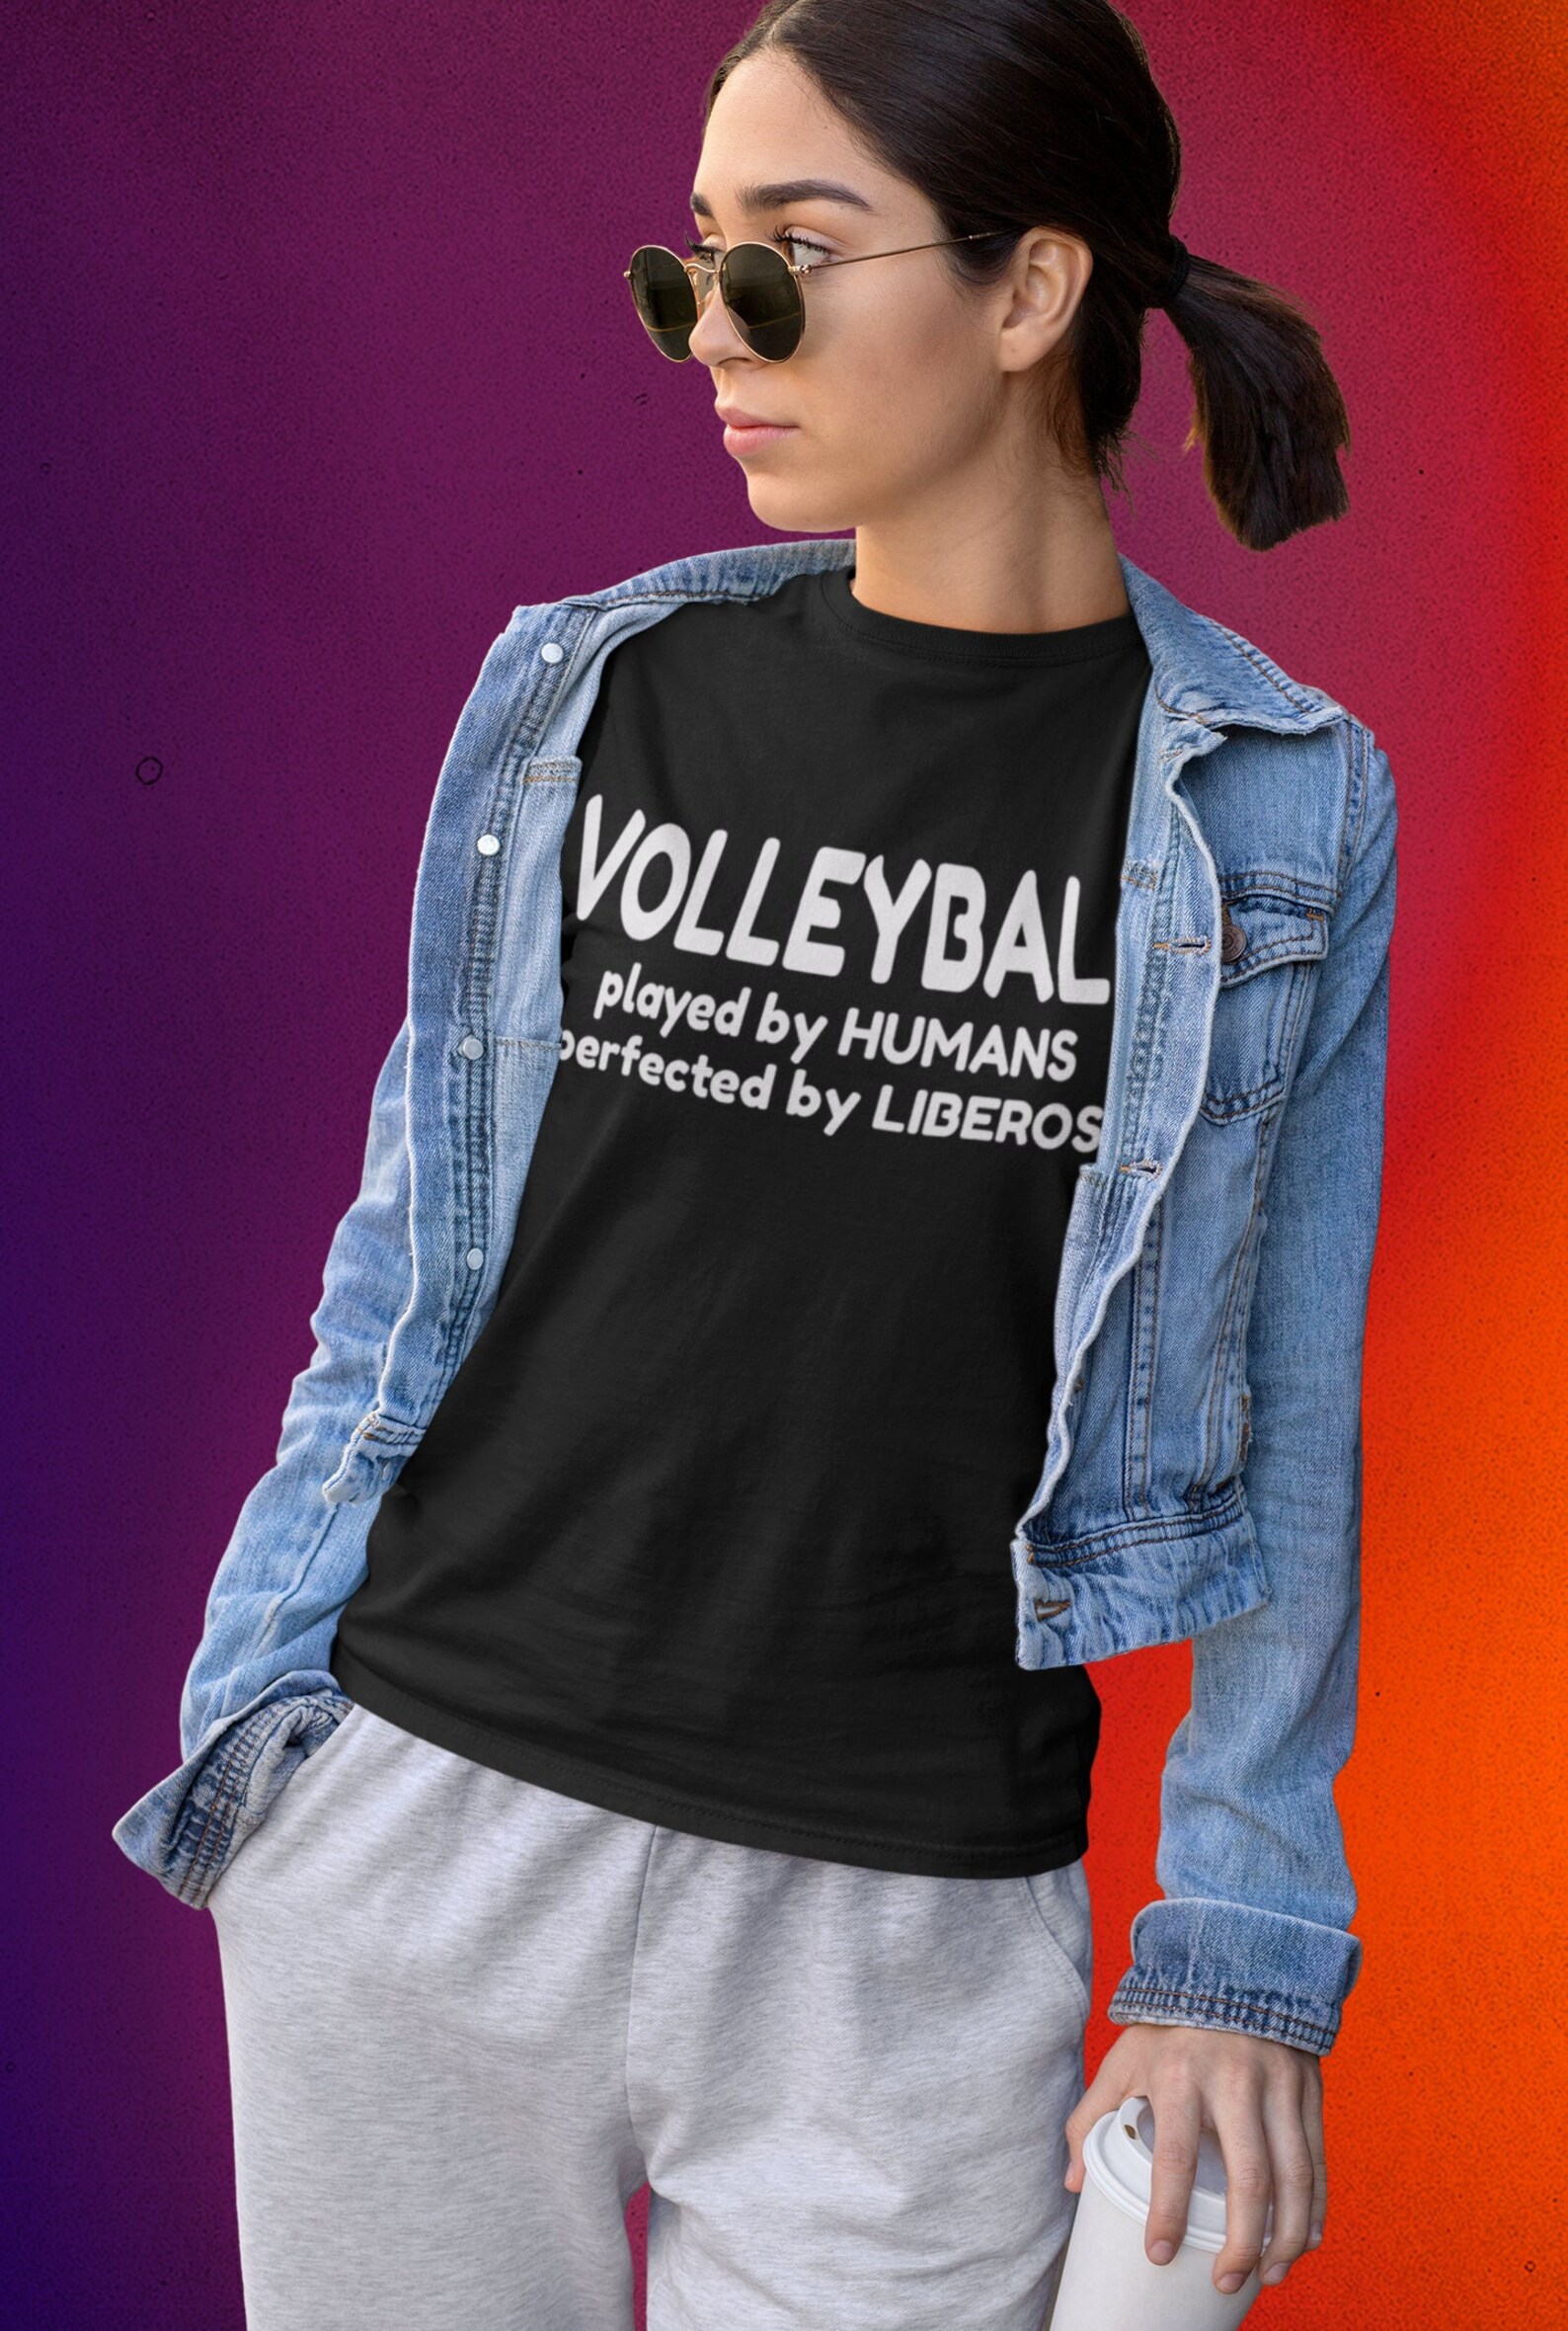 Volleyball quotes like "VOLLEYBALL Played by Humans Perfected by Liberos" are some of the motivational volleyball sayings on short and long sleeve shirts, matching oversized hoodies and wide leg volleyball pajama pj pants.